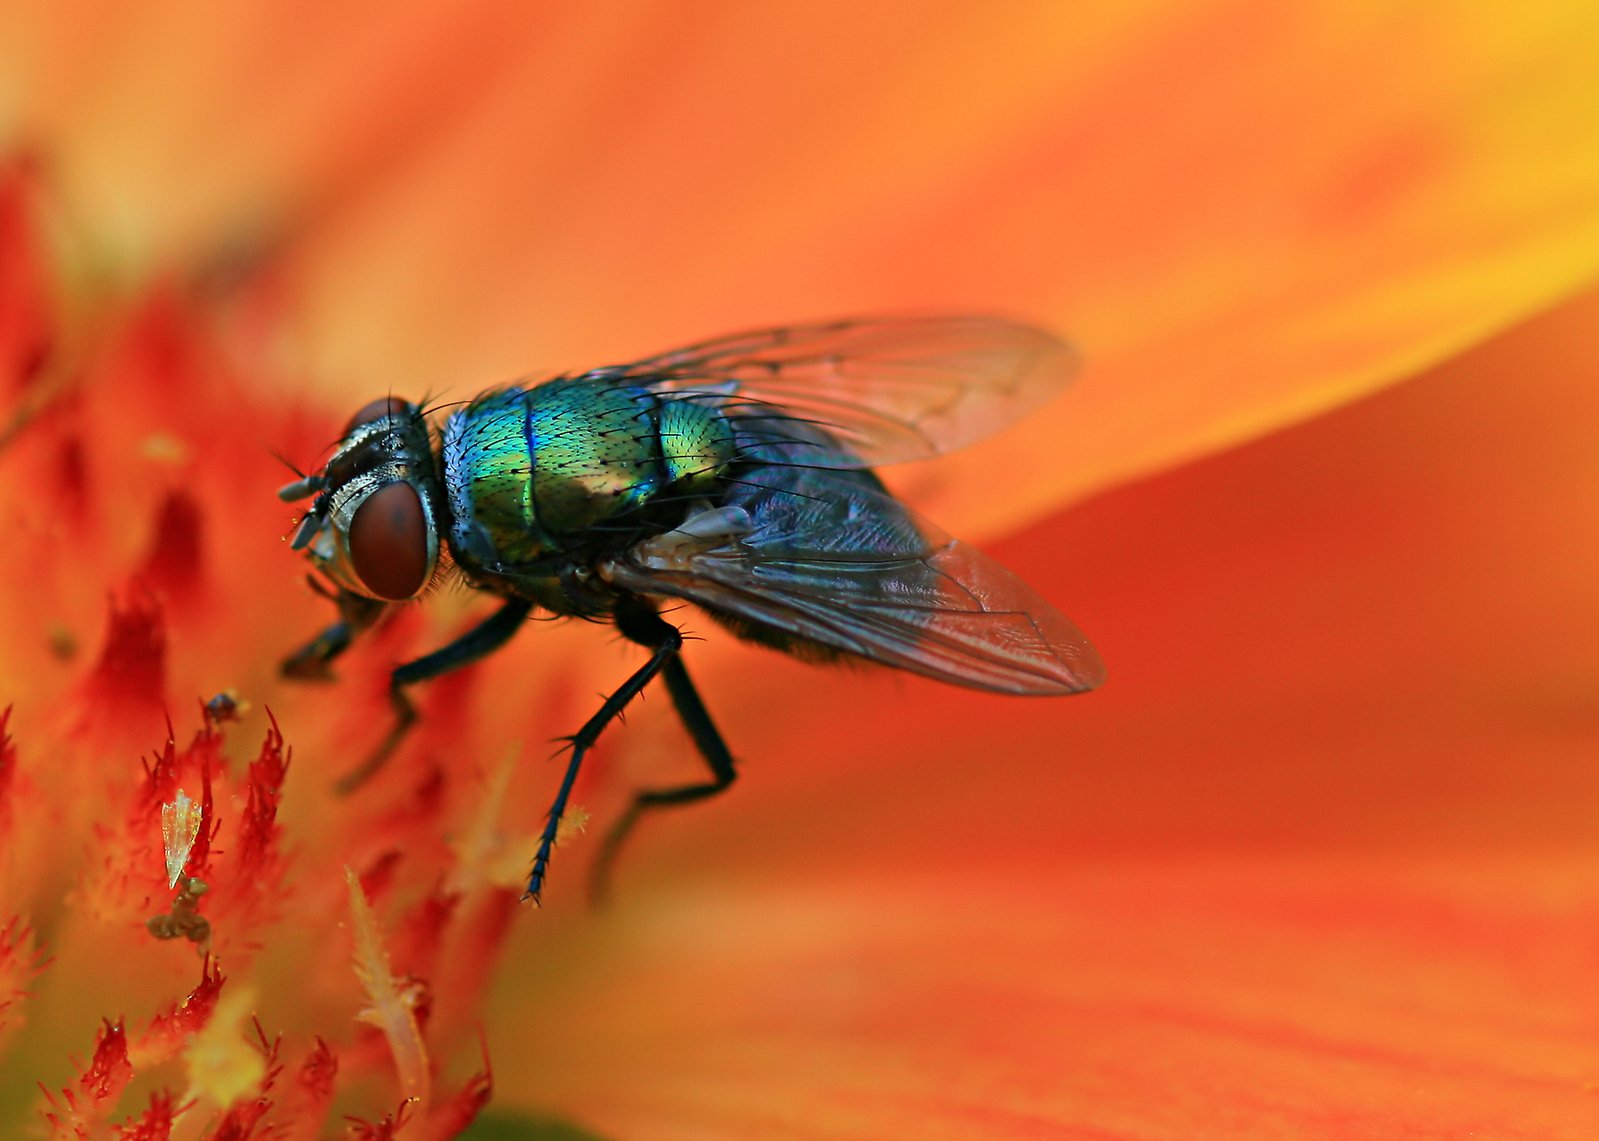 a close - up of the head and wing of a fly sitting on a flower